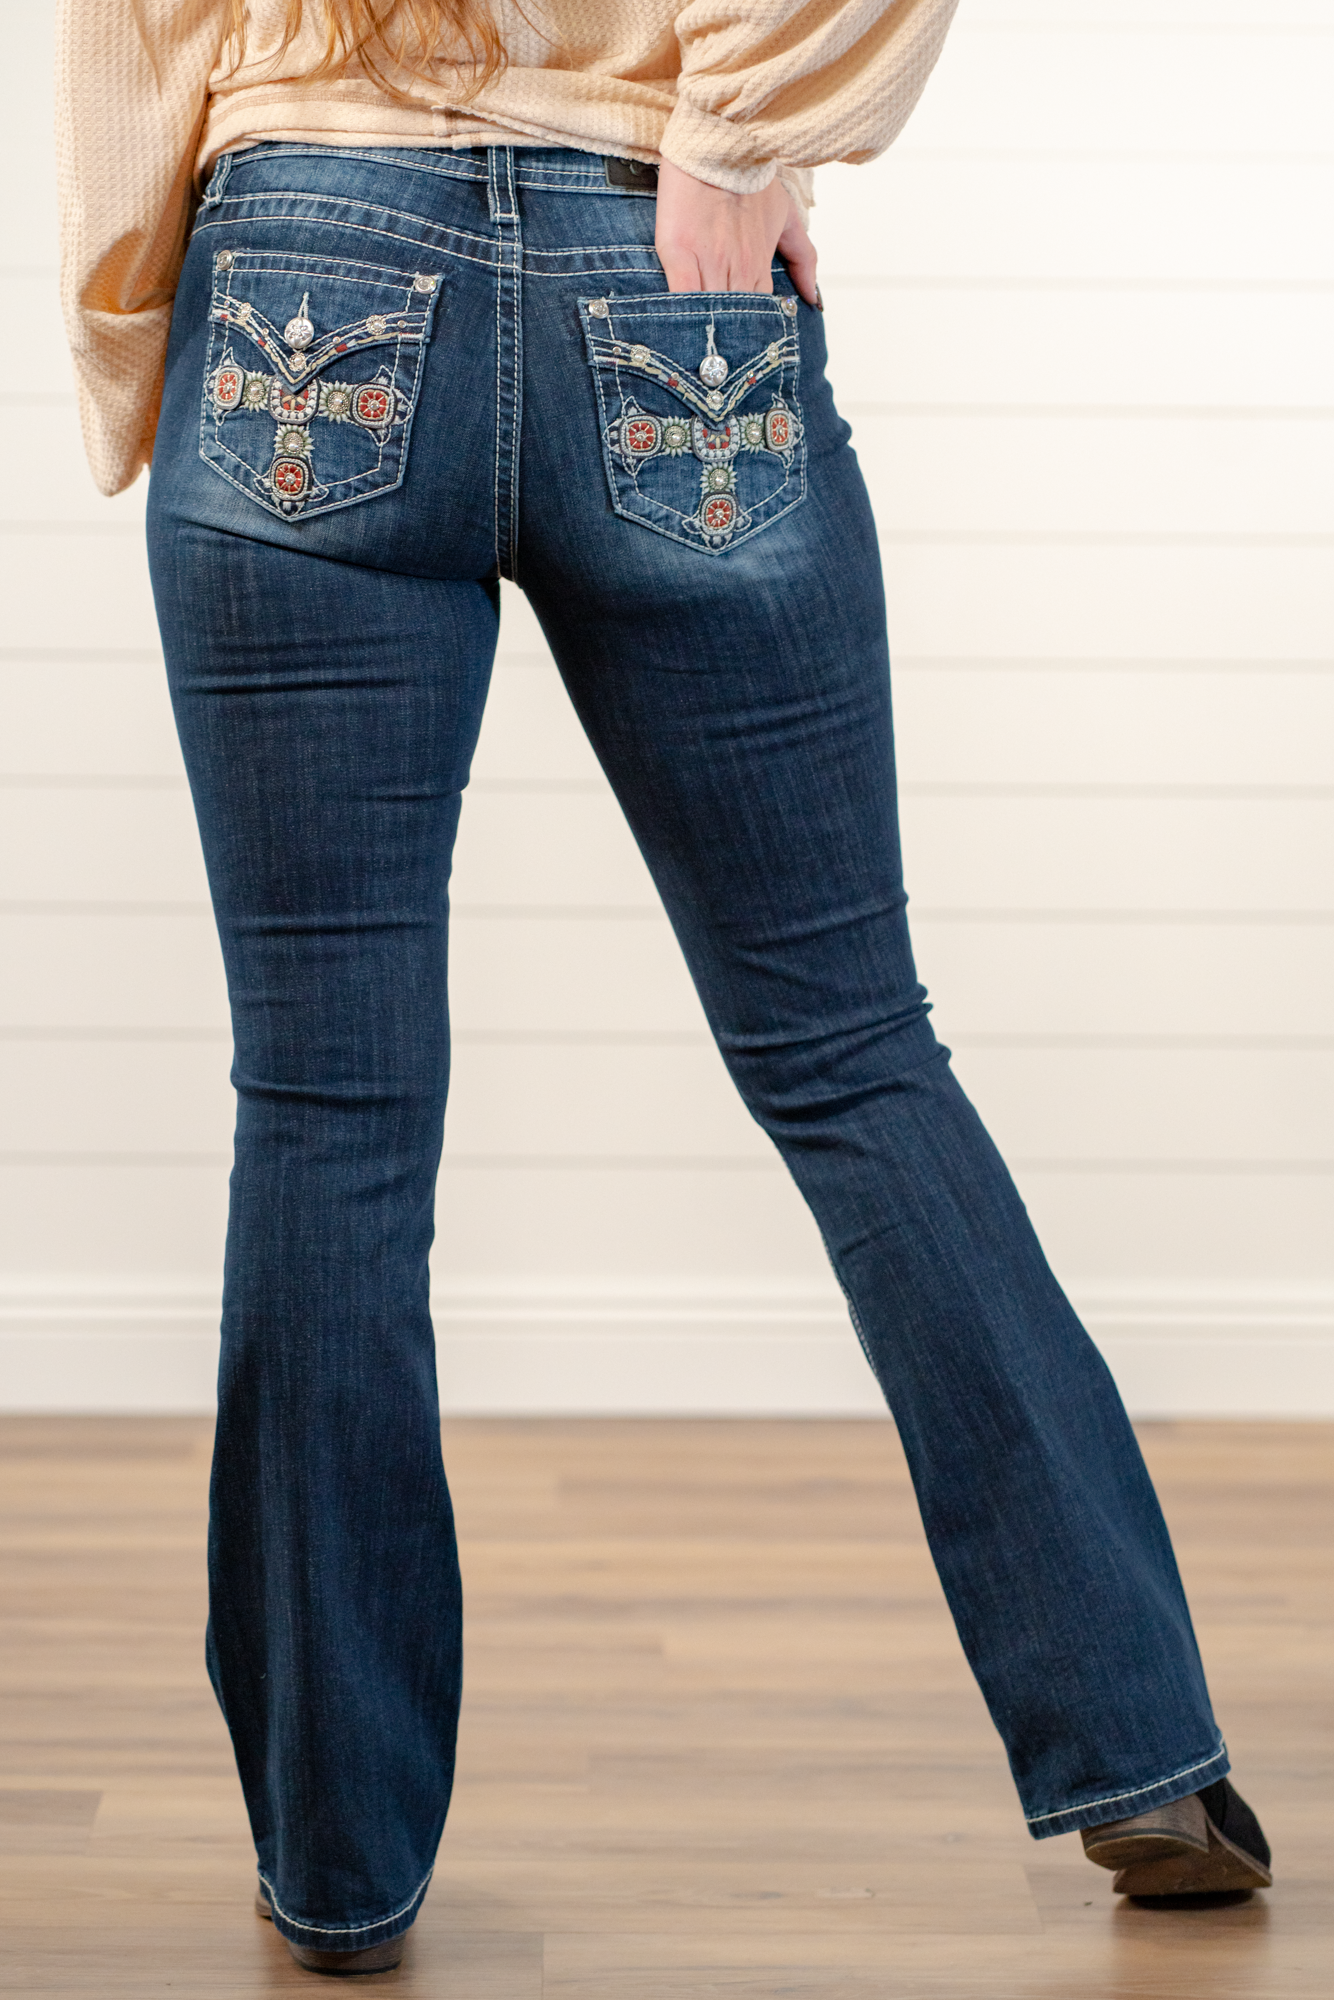 Miss Me  Wear these cross pockets jeans every day to bling up your wardrobe. Boot cut jeans featuring a 5 pocket design, whiskering, and crystal rivets. Wash: Dark Blue Inseam: 34" Boot Cut* Mid Rise, 8.75" Front Rise* Silver Buttons and Rivets  Material: 98% Cotton 2% Elastane Style #: M3824B   Contact us for any additional measurements or sizing.    *Measured on the smallest size, measurements may vary by size.  